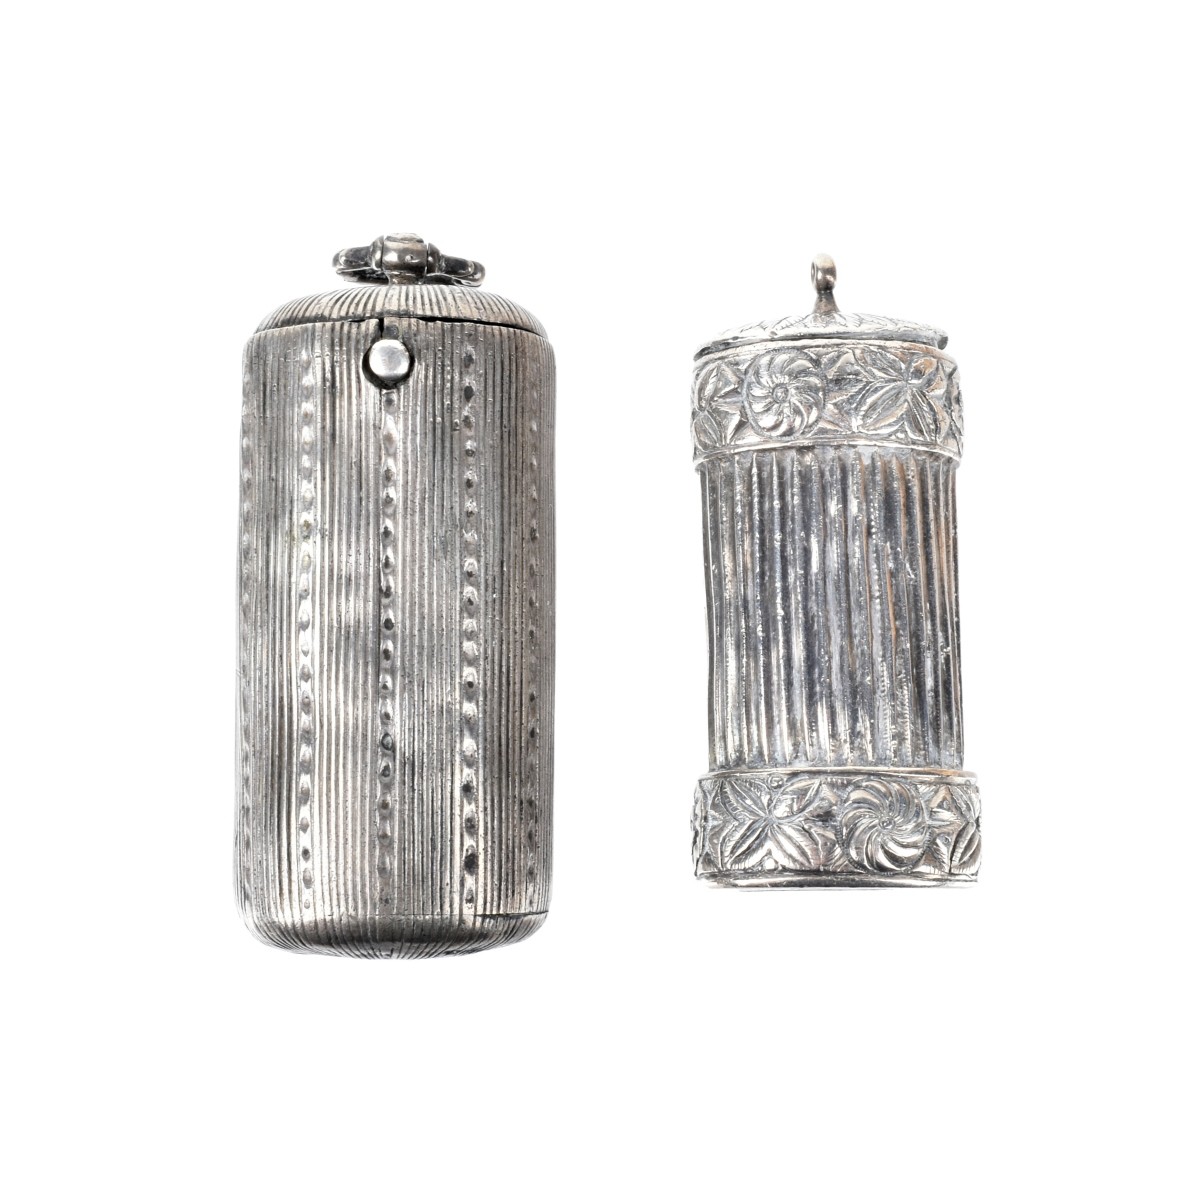 Antique Spanish Colonial Silver Containers